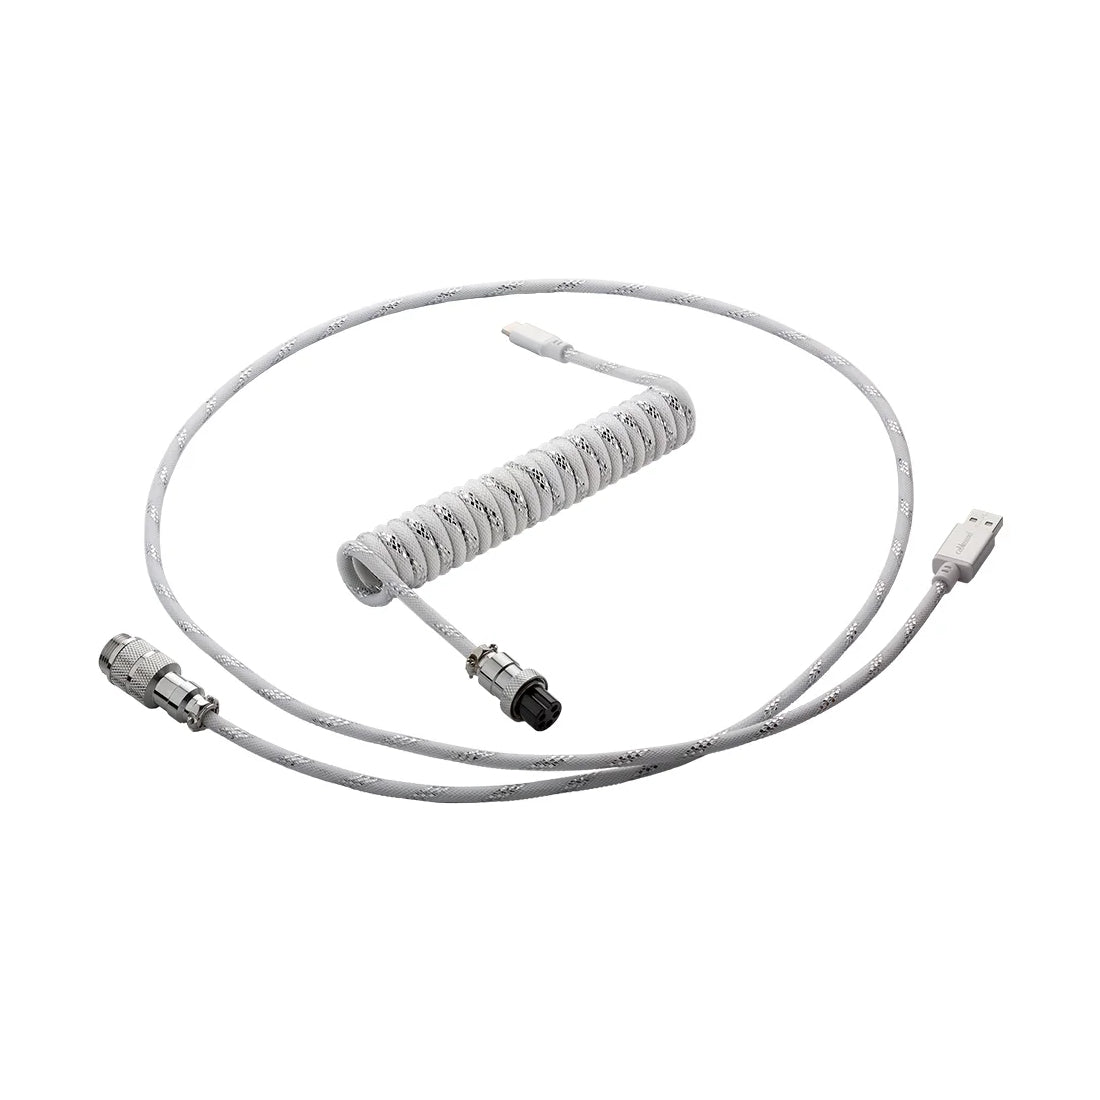 CableMod Pro Coiled Keyboard Cable (Sterling White, USB A to USB Type C, 150cm) - كابل - Store 974 | ستور ٩٧٤